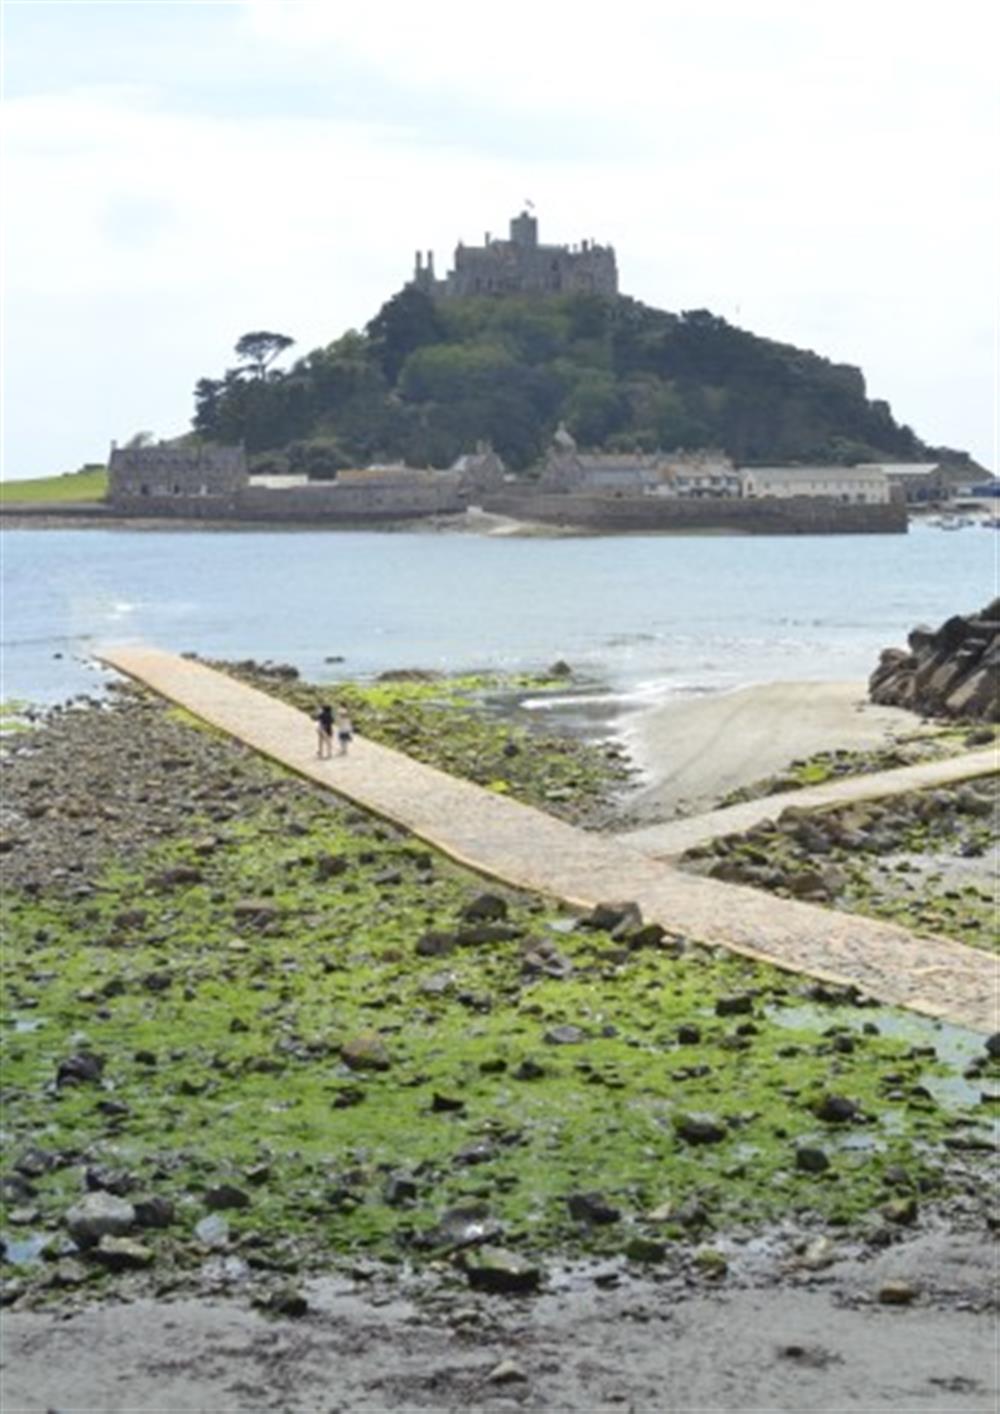 St Michael's Mount is a 45 minute drive. Walk across the causeway or catch the water-taxi to the island. at The Strand in Helford Passage